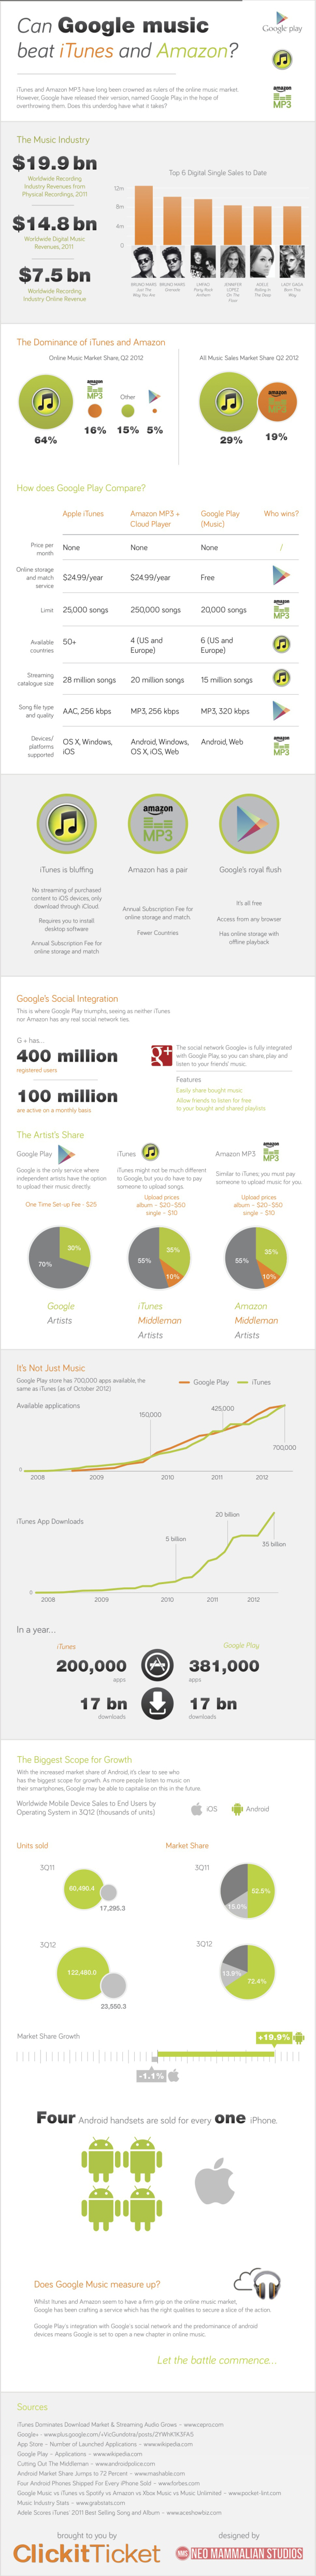 13. Can Google music beat iTunes and Amazon